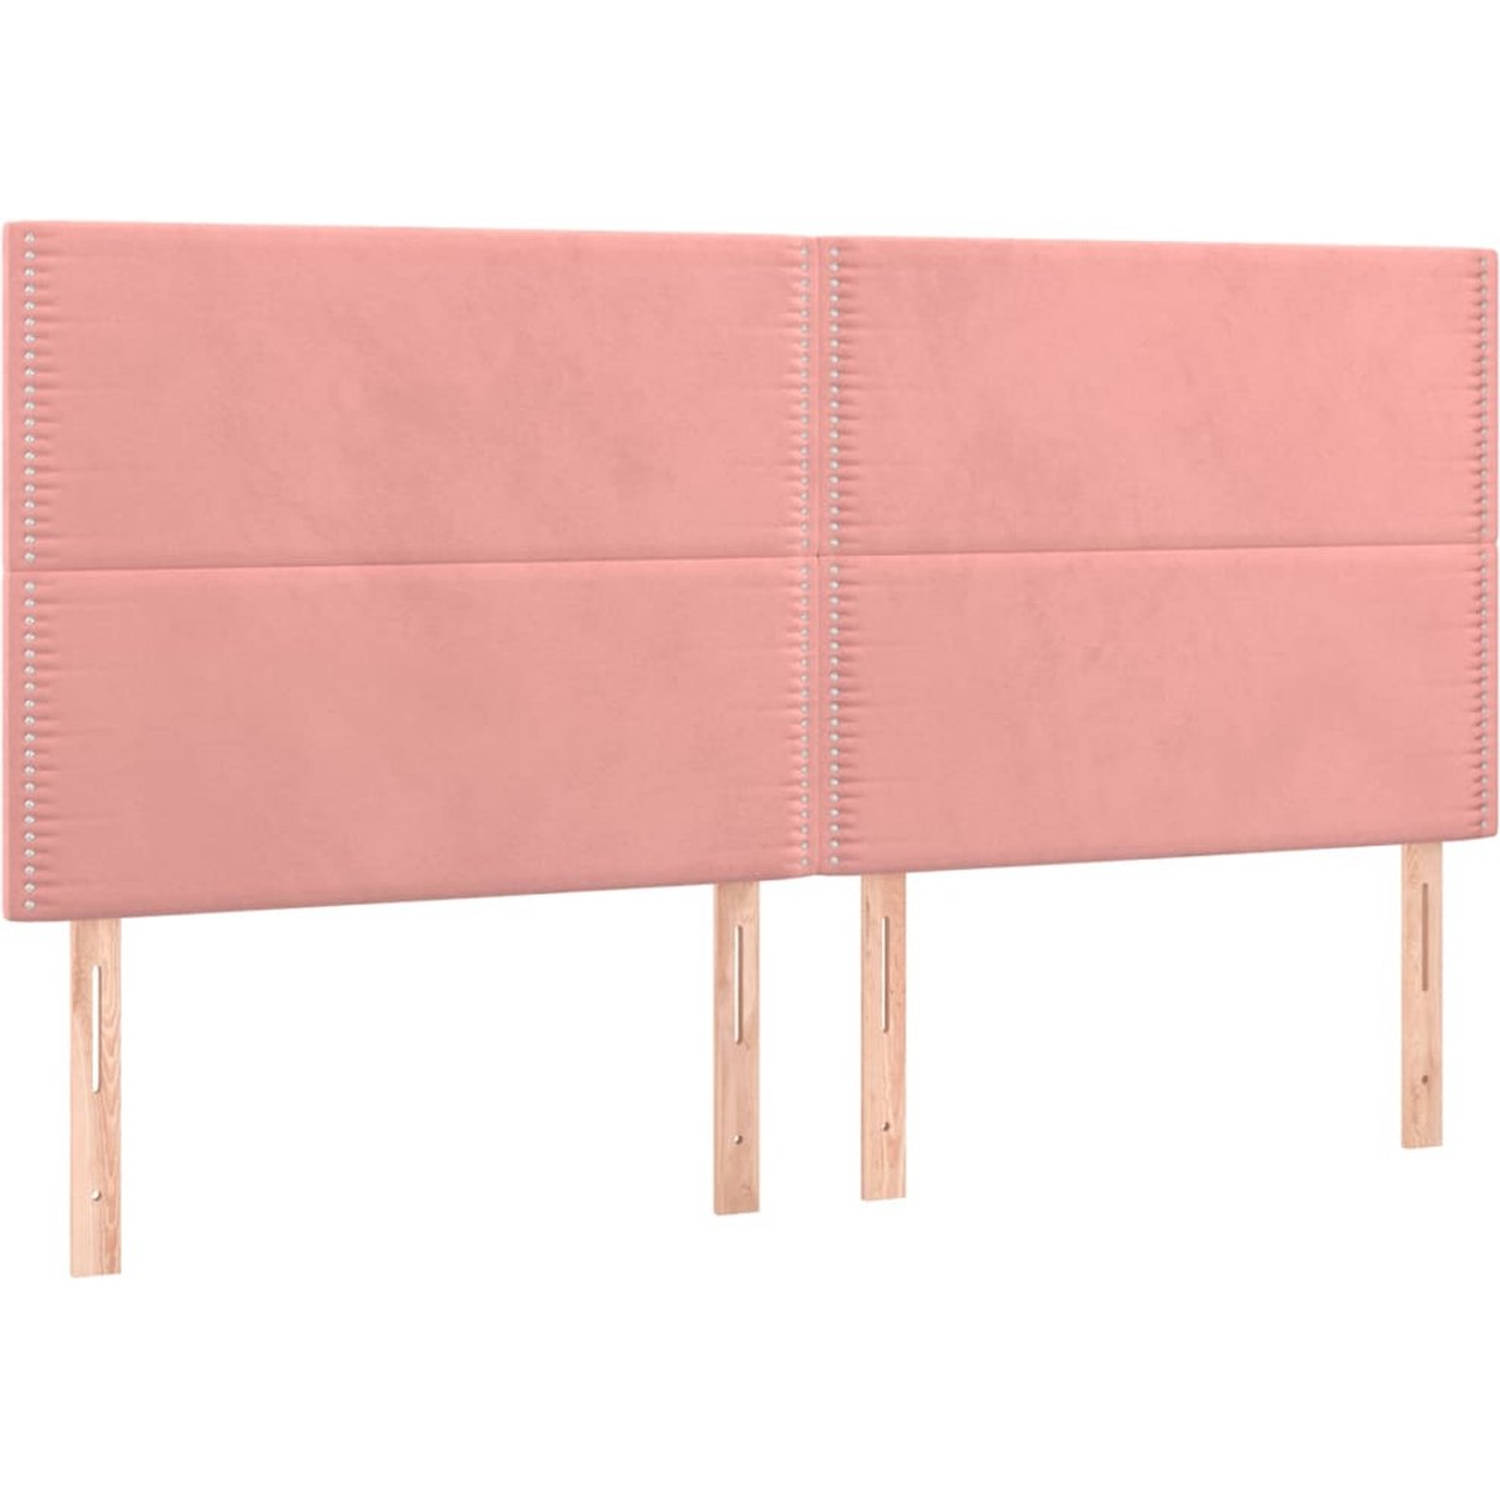 The Living Store Boxspringbed - Fluweel - Roze - 203 x 203 x 118/128 cm - Pocketvering